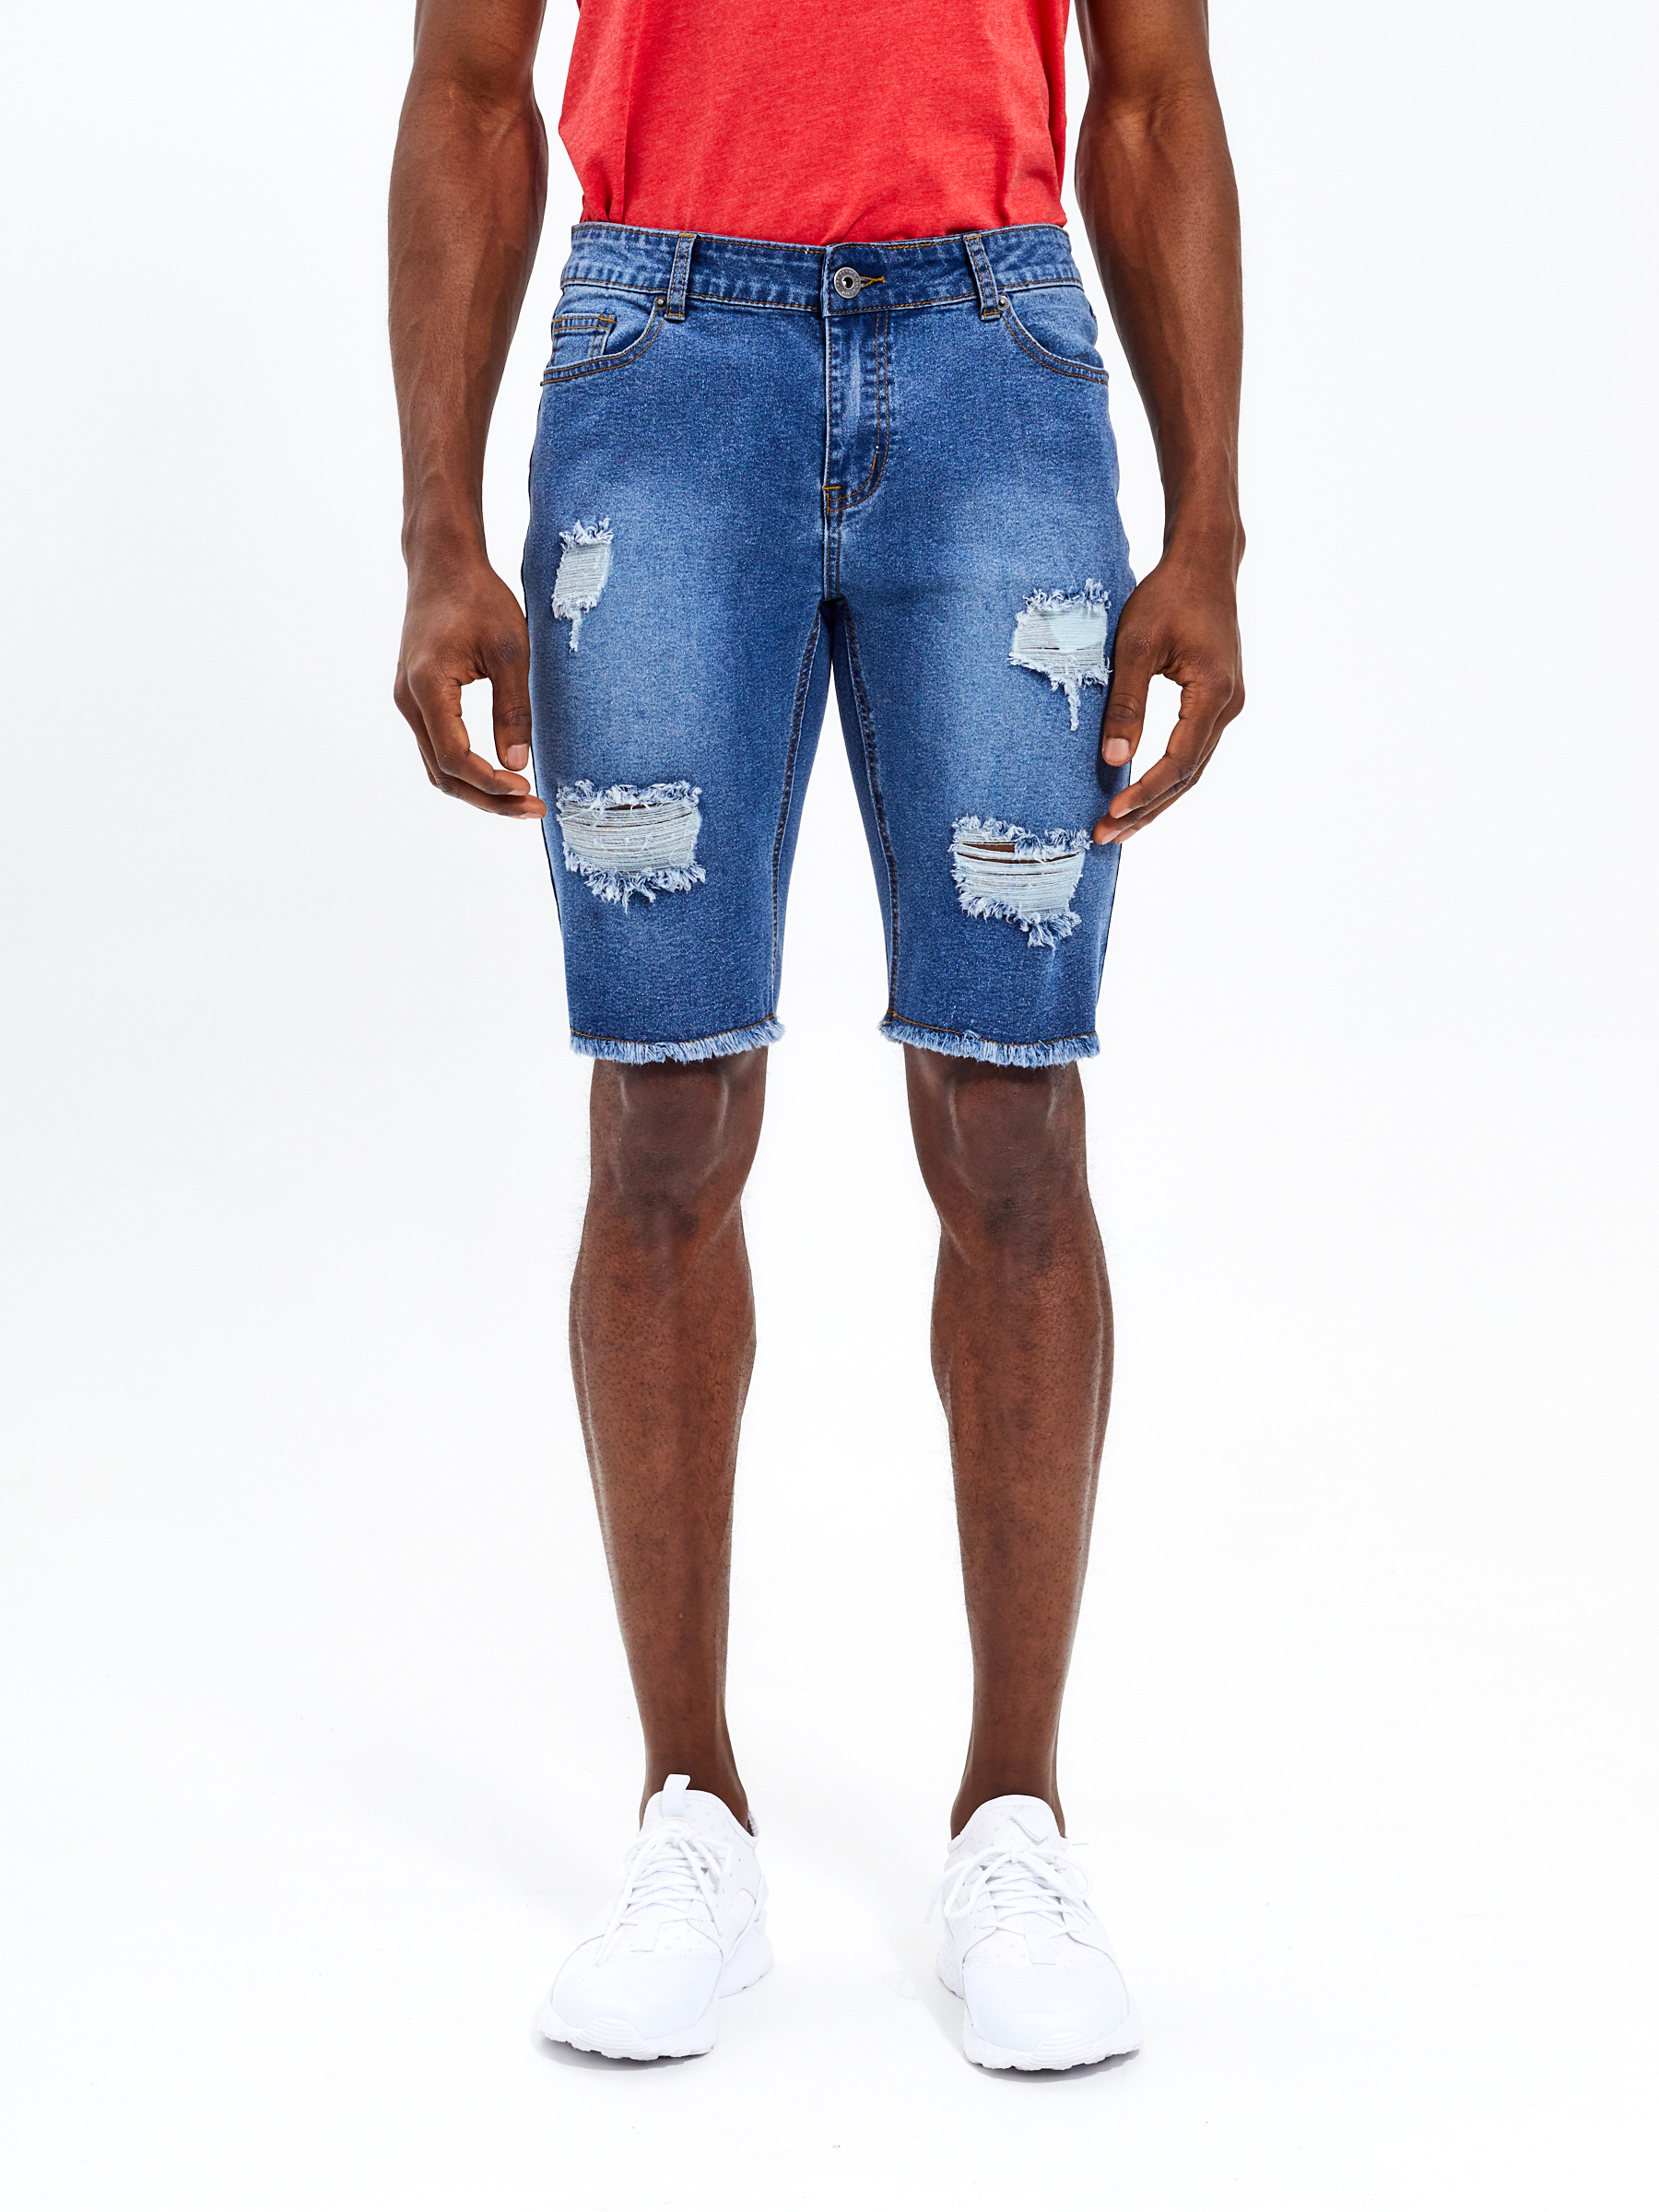 Mens Designer Retro Mens Jeans Short Length With Star Patch And Ripped  Detailing Big Size Summer Short Pants From Guyu11, $34.52 | DHgate.Com